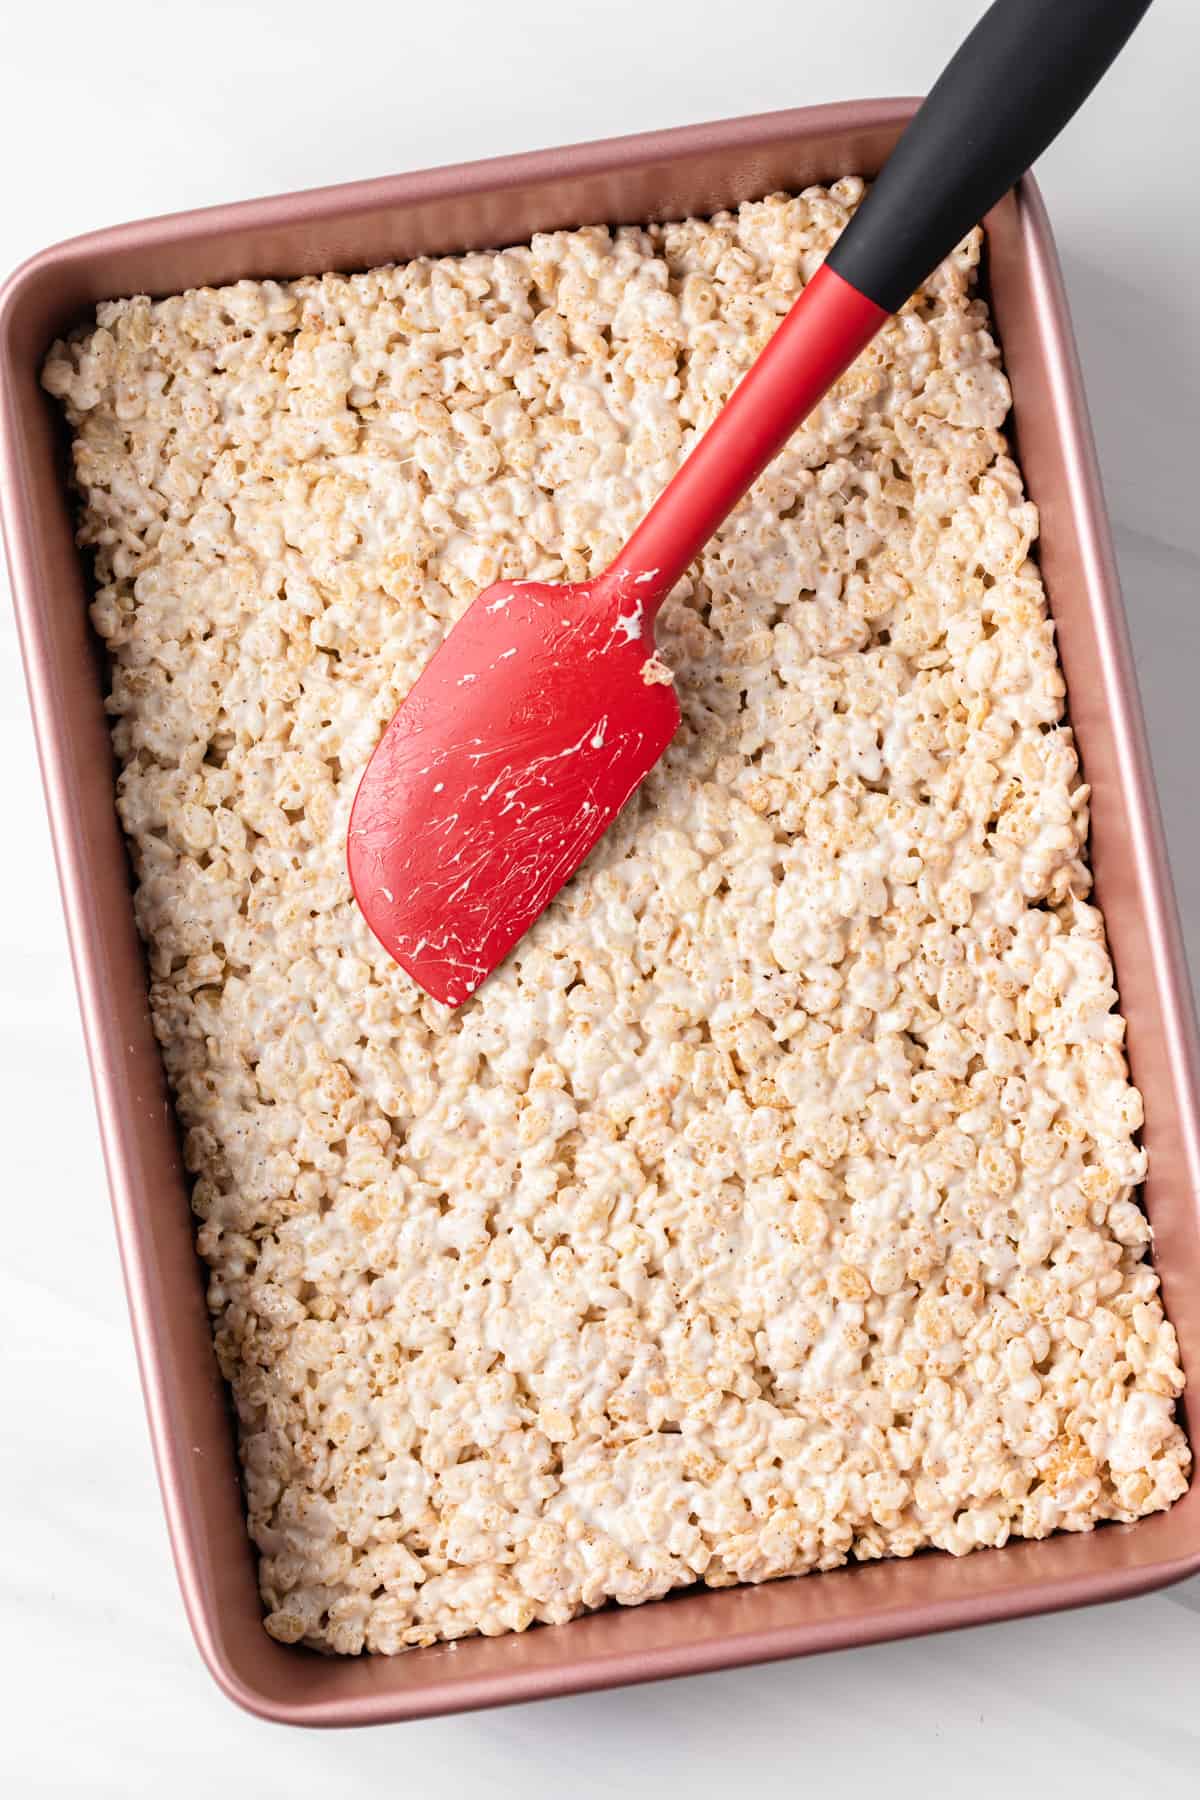 rice krispie treat mixture pressed into pink pan with red spatula